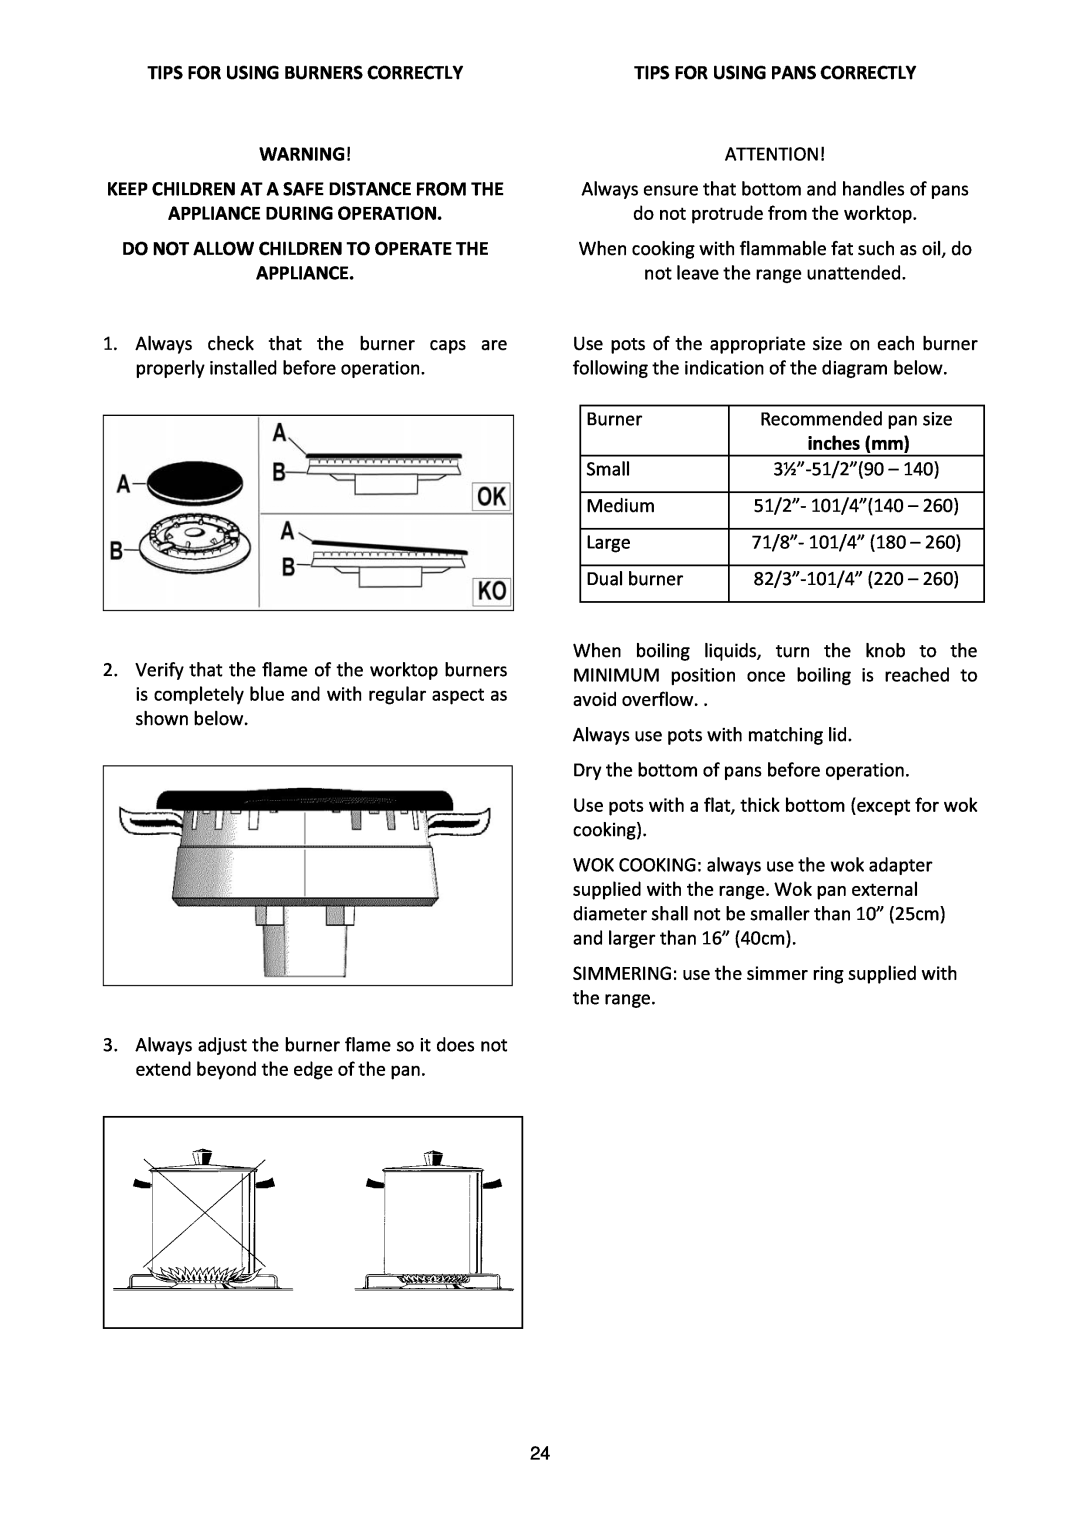 Bertazzoni PRO30 4 GAS NE, PRO30 4 GAS BI Tips For Using Burners Correctly, Do Not Allow Children To Operate The Appliance 